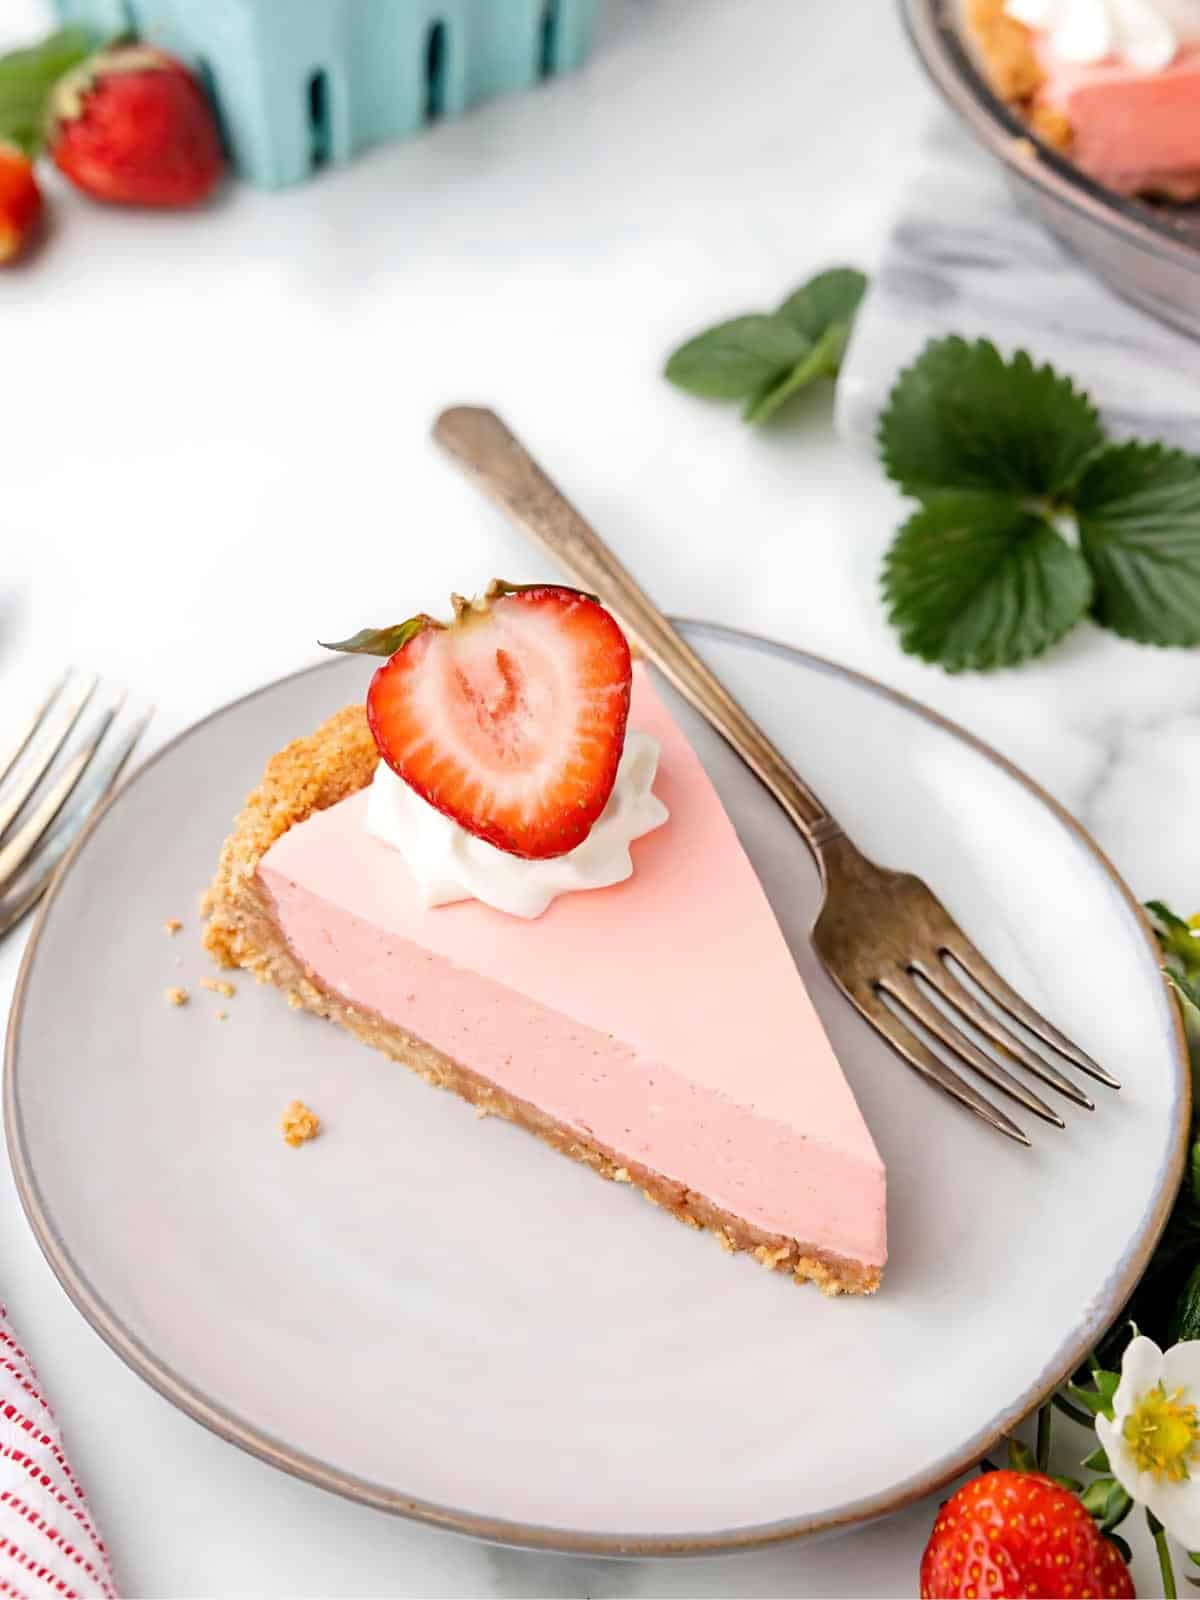 A slice of strawberry jello pie topped with sliced fresh strawberry.